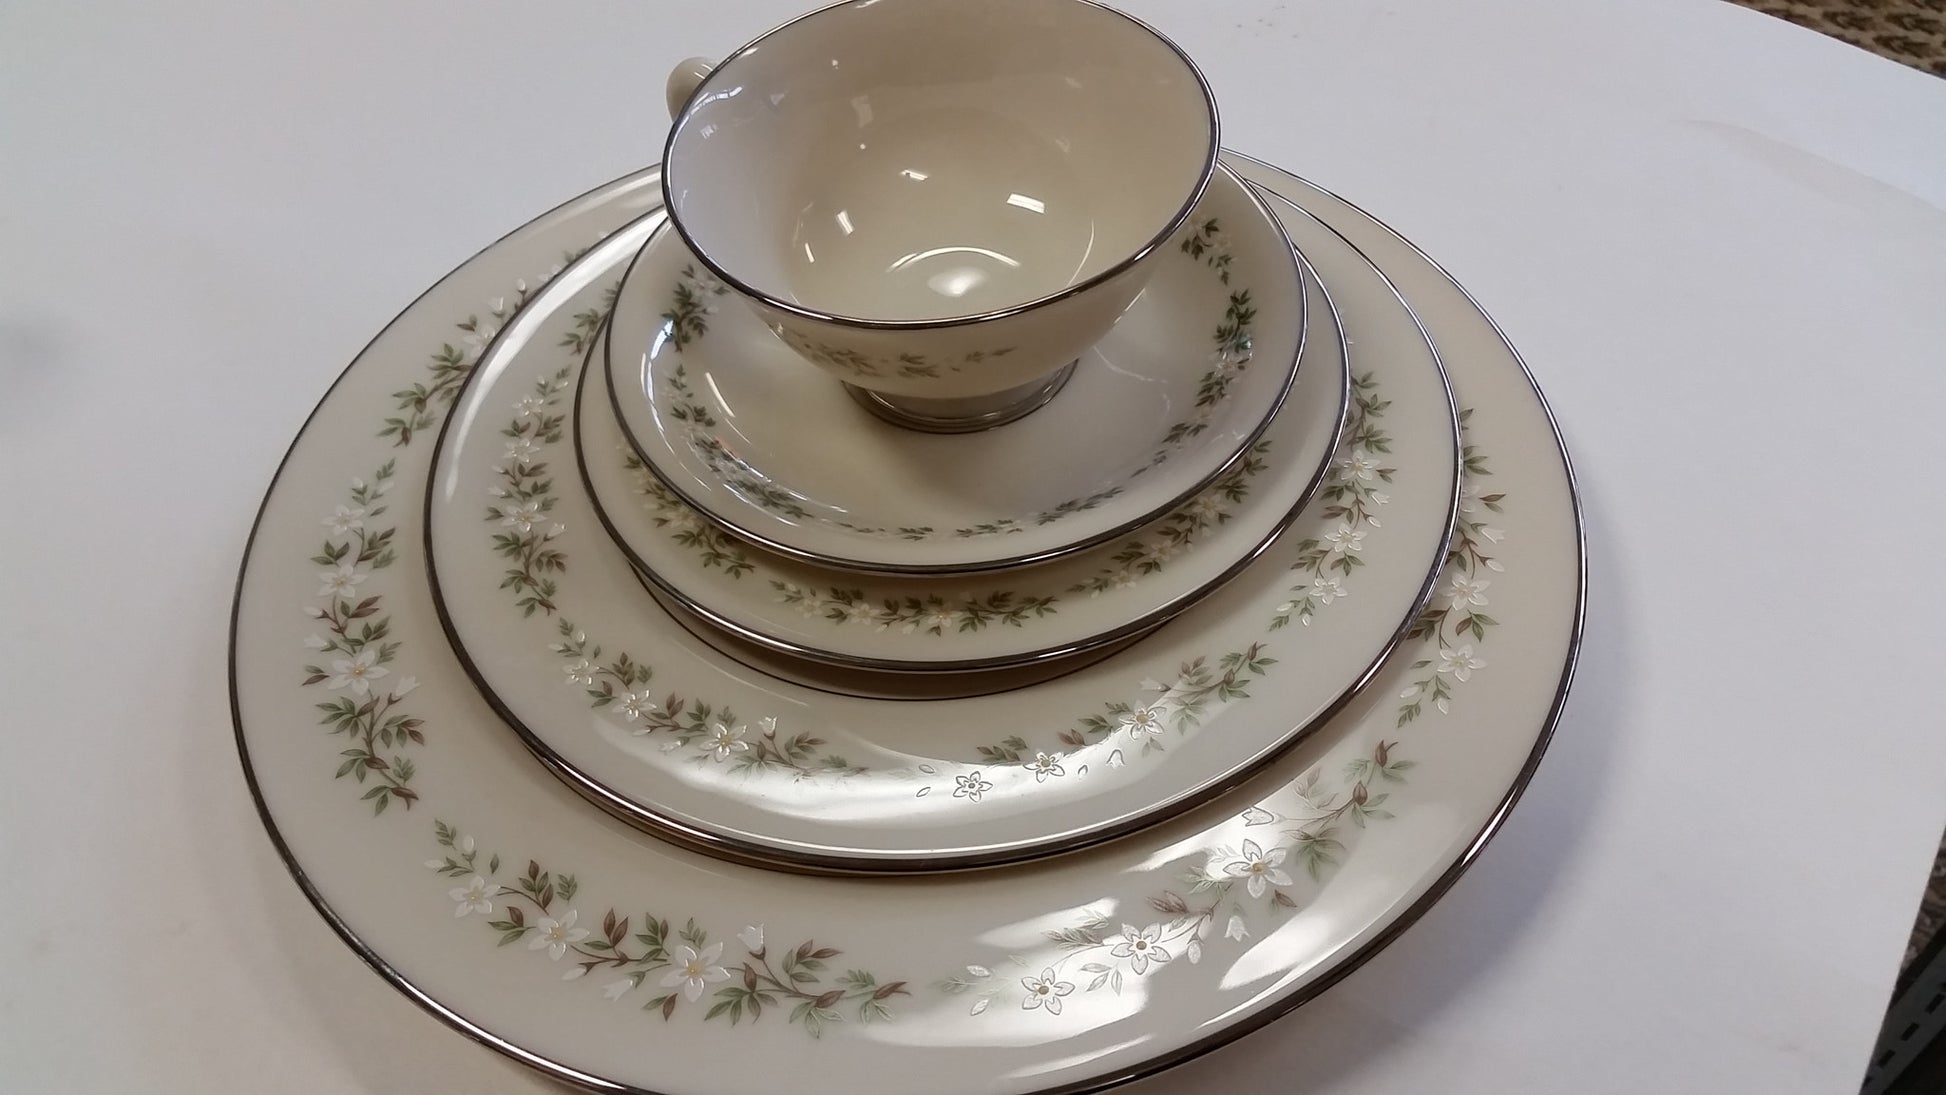 Lenox Brookdale China 5 piece setting - O'Rourke crystal awards & gifts abp cut glass